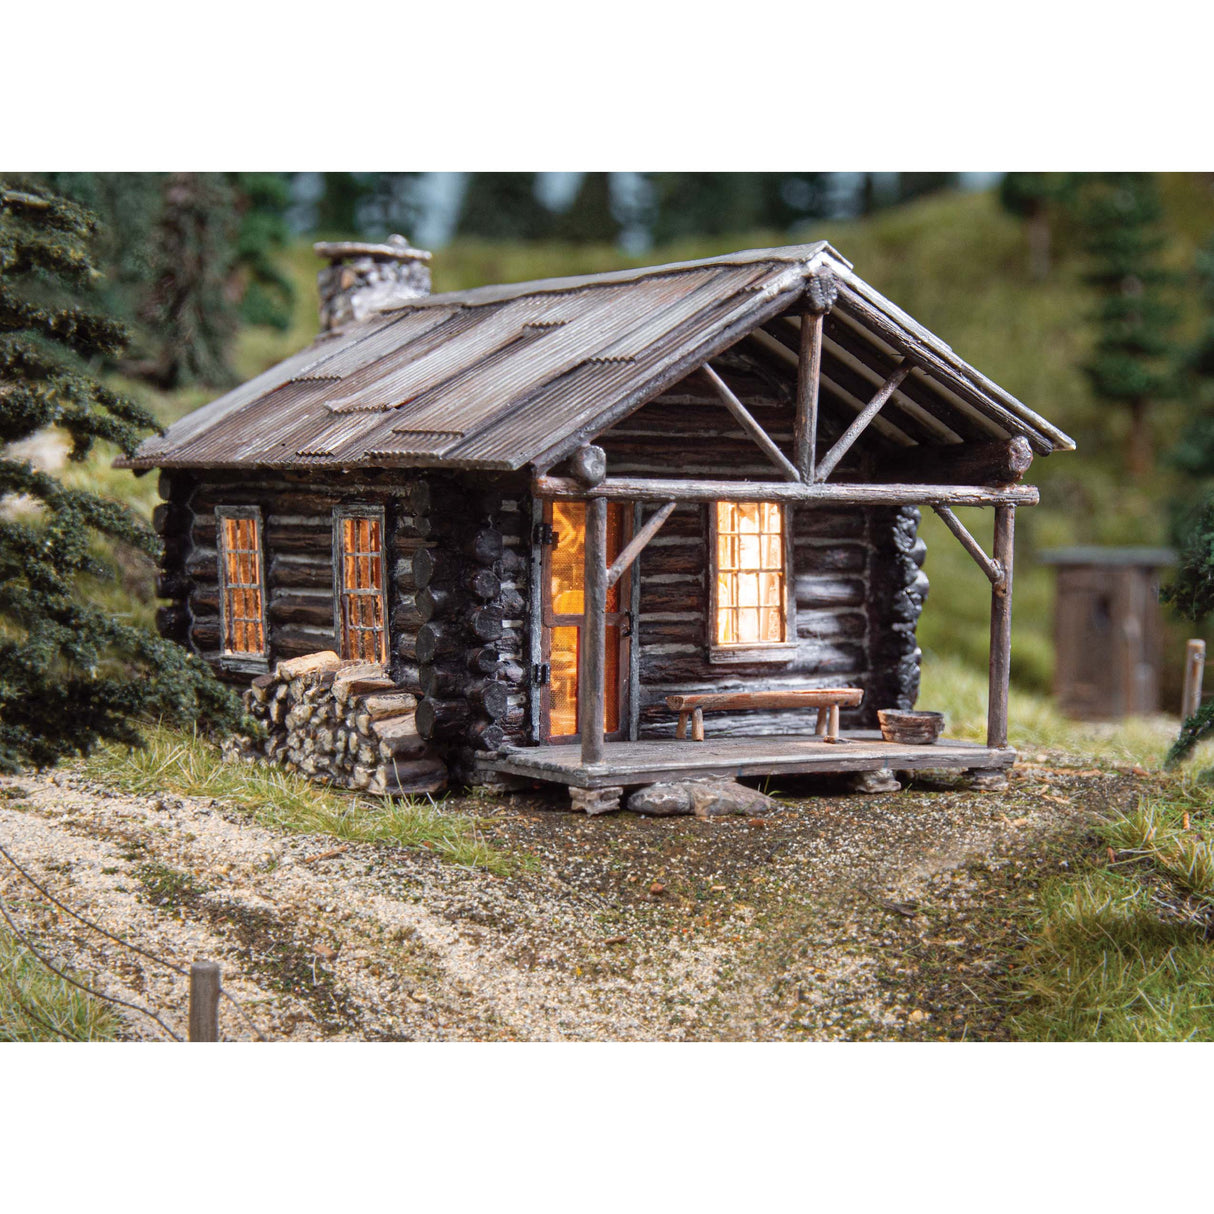 Woodland Scenics N Scale Cozy Cabin Built and Ready